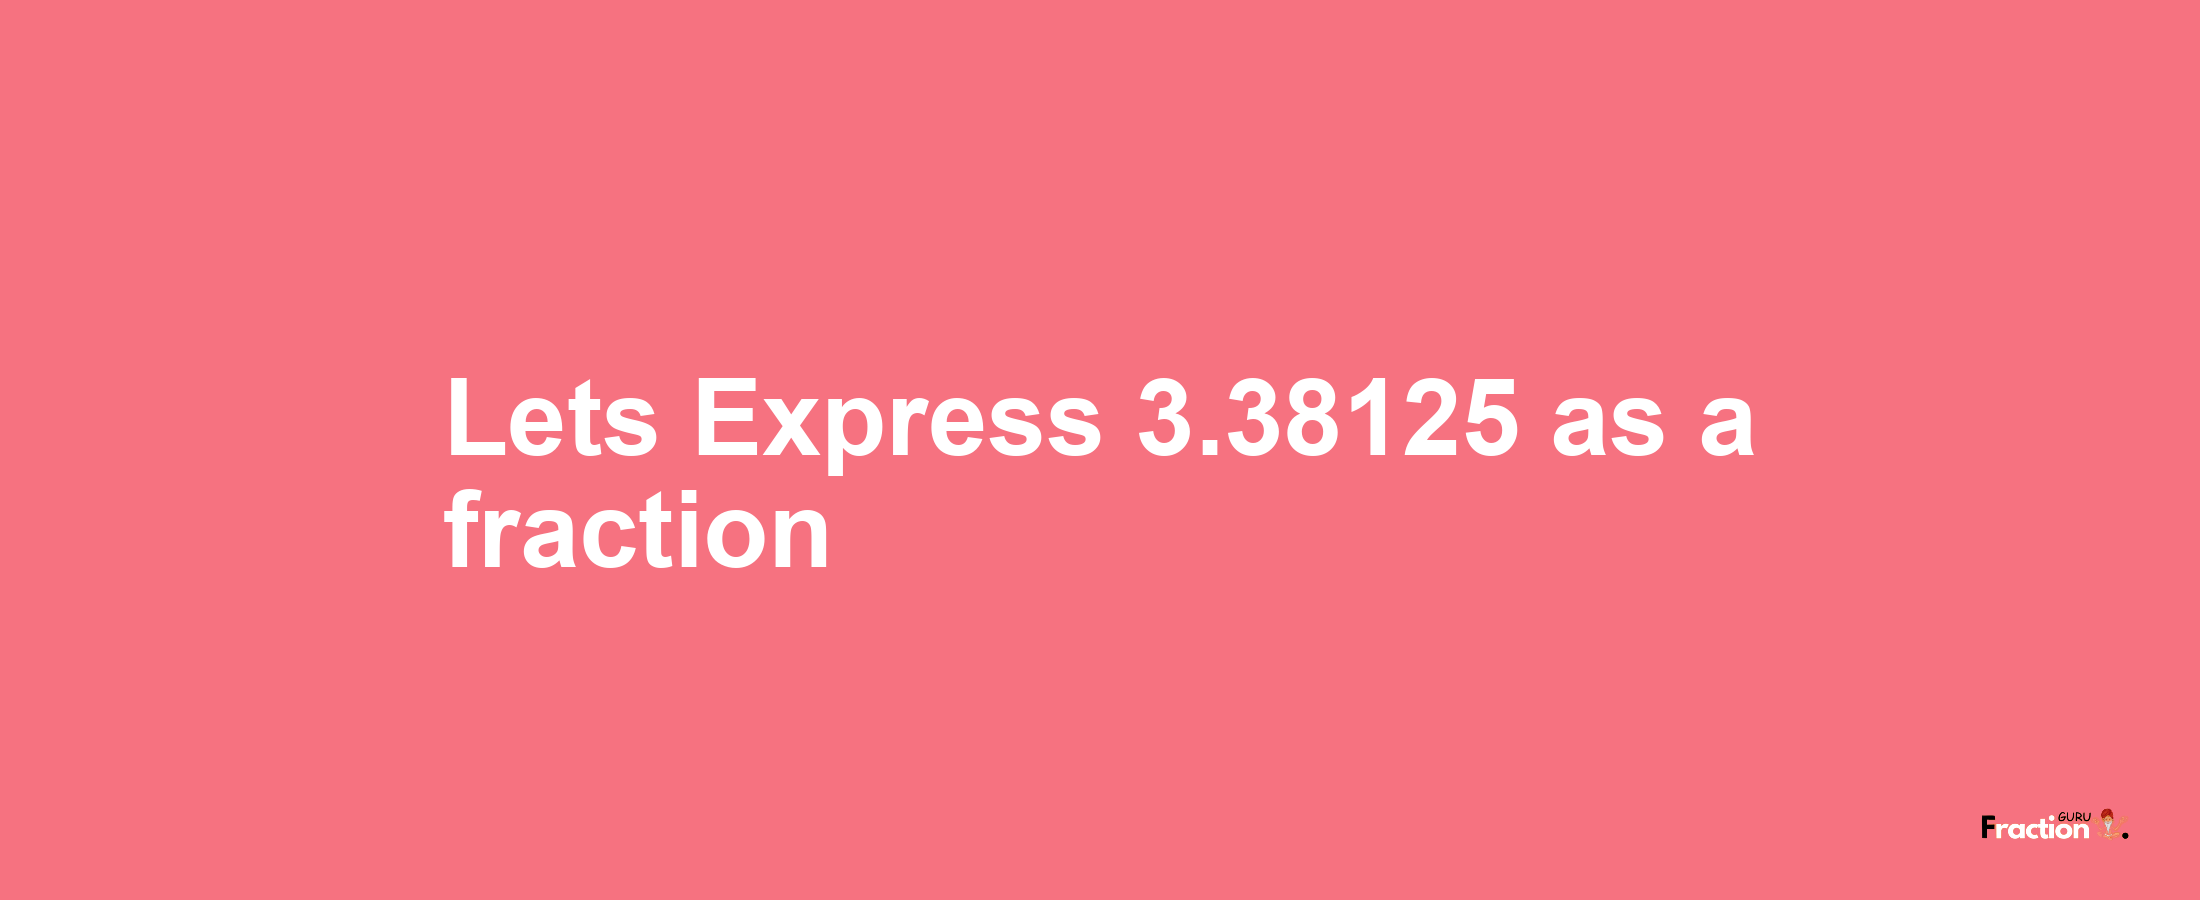 Lets Express 3.38125 as afraction